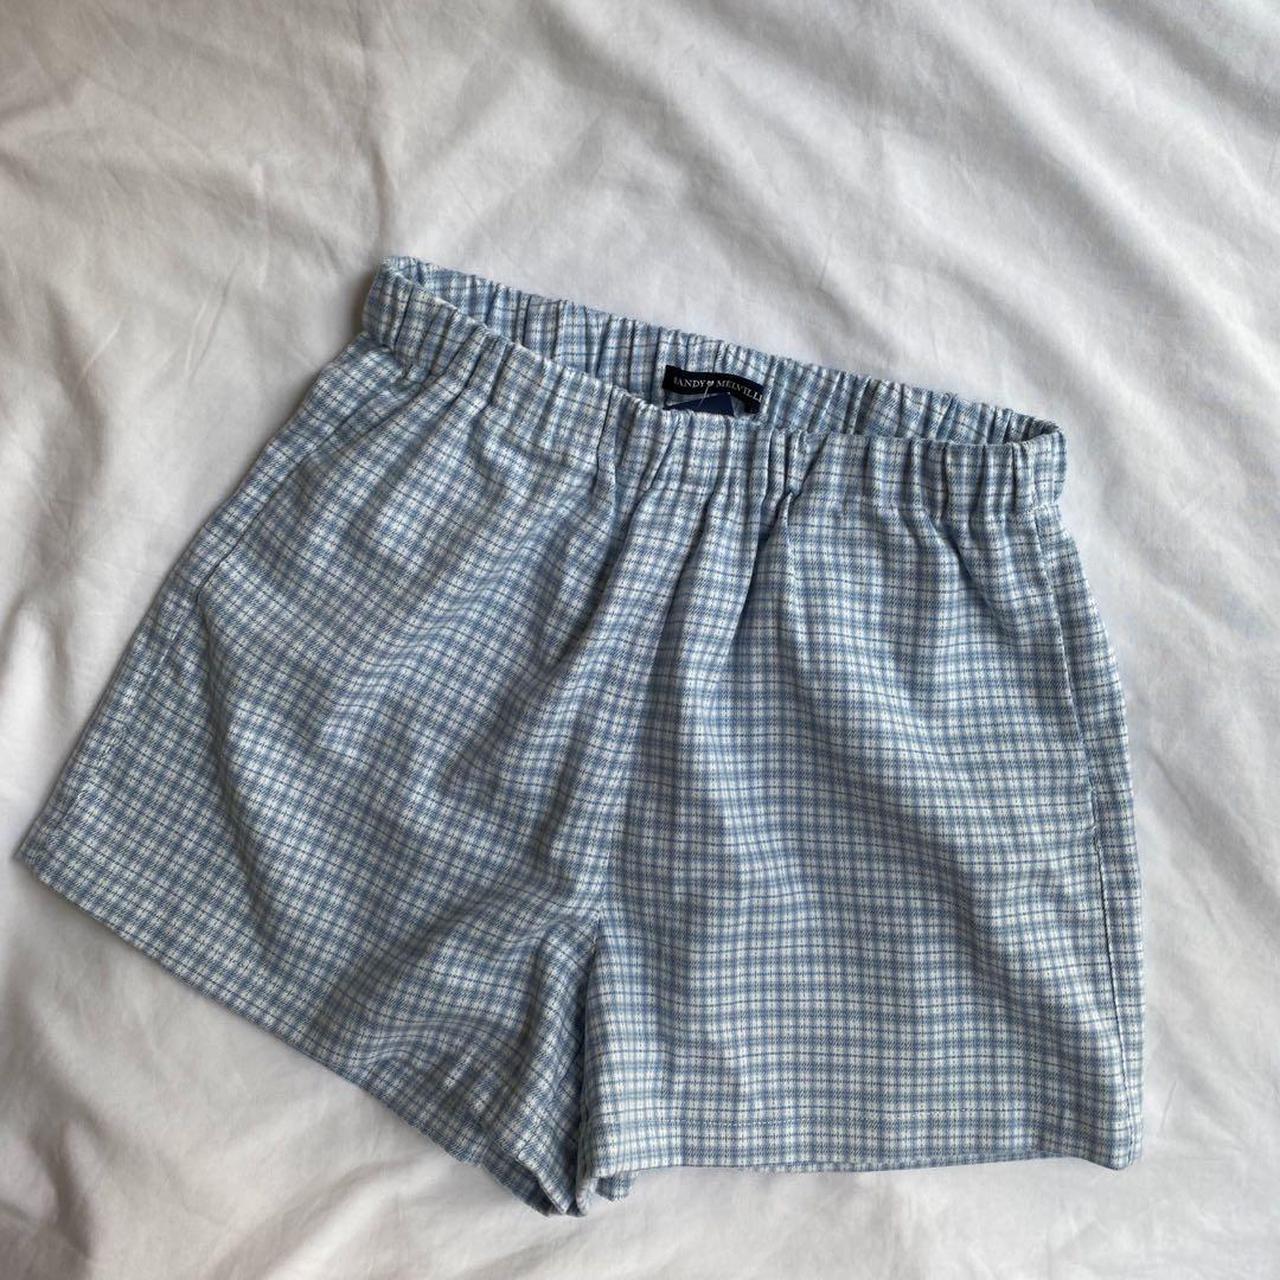 Brandy Melville Women's Blue and White Shorts